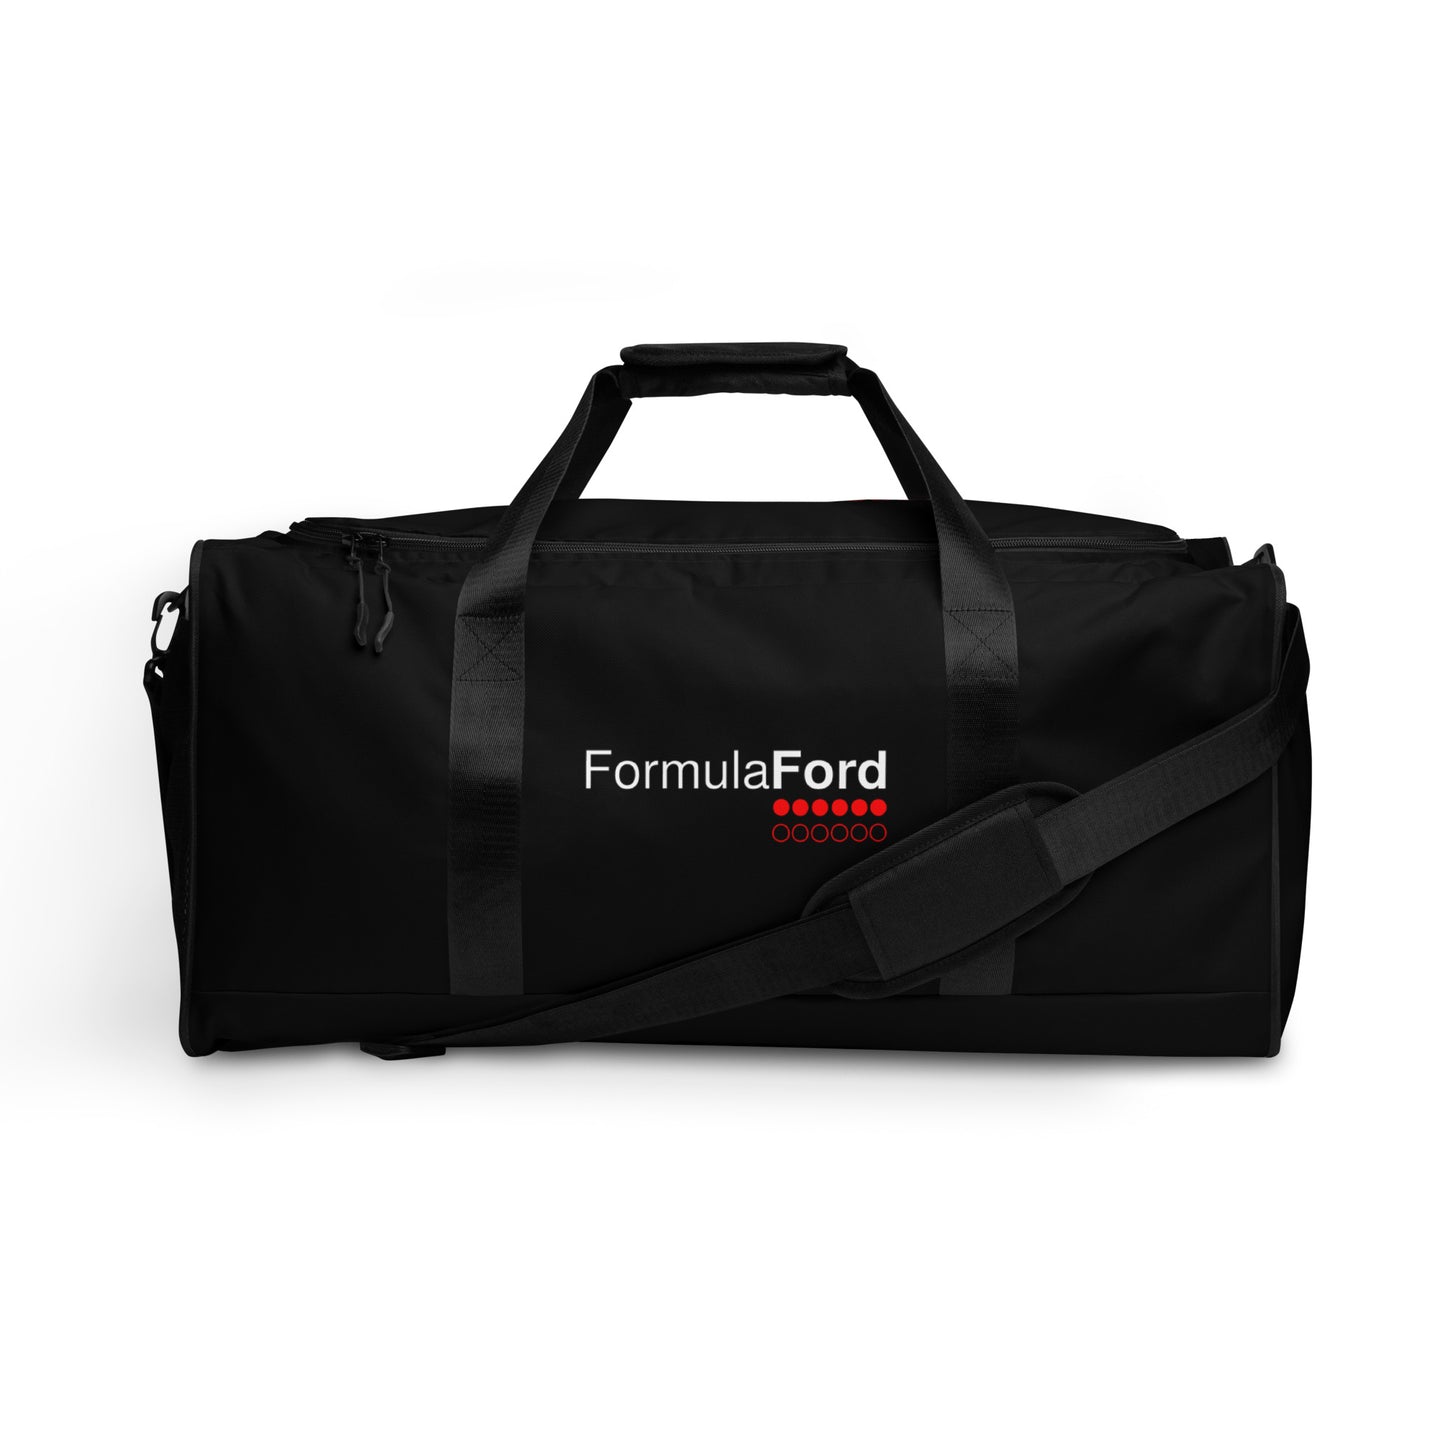 FORMULA FORD Official Waterproof Duffle bag - Large - Full carbon